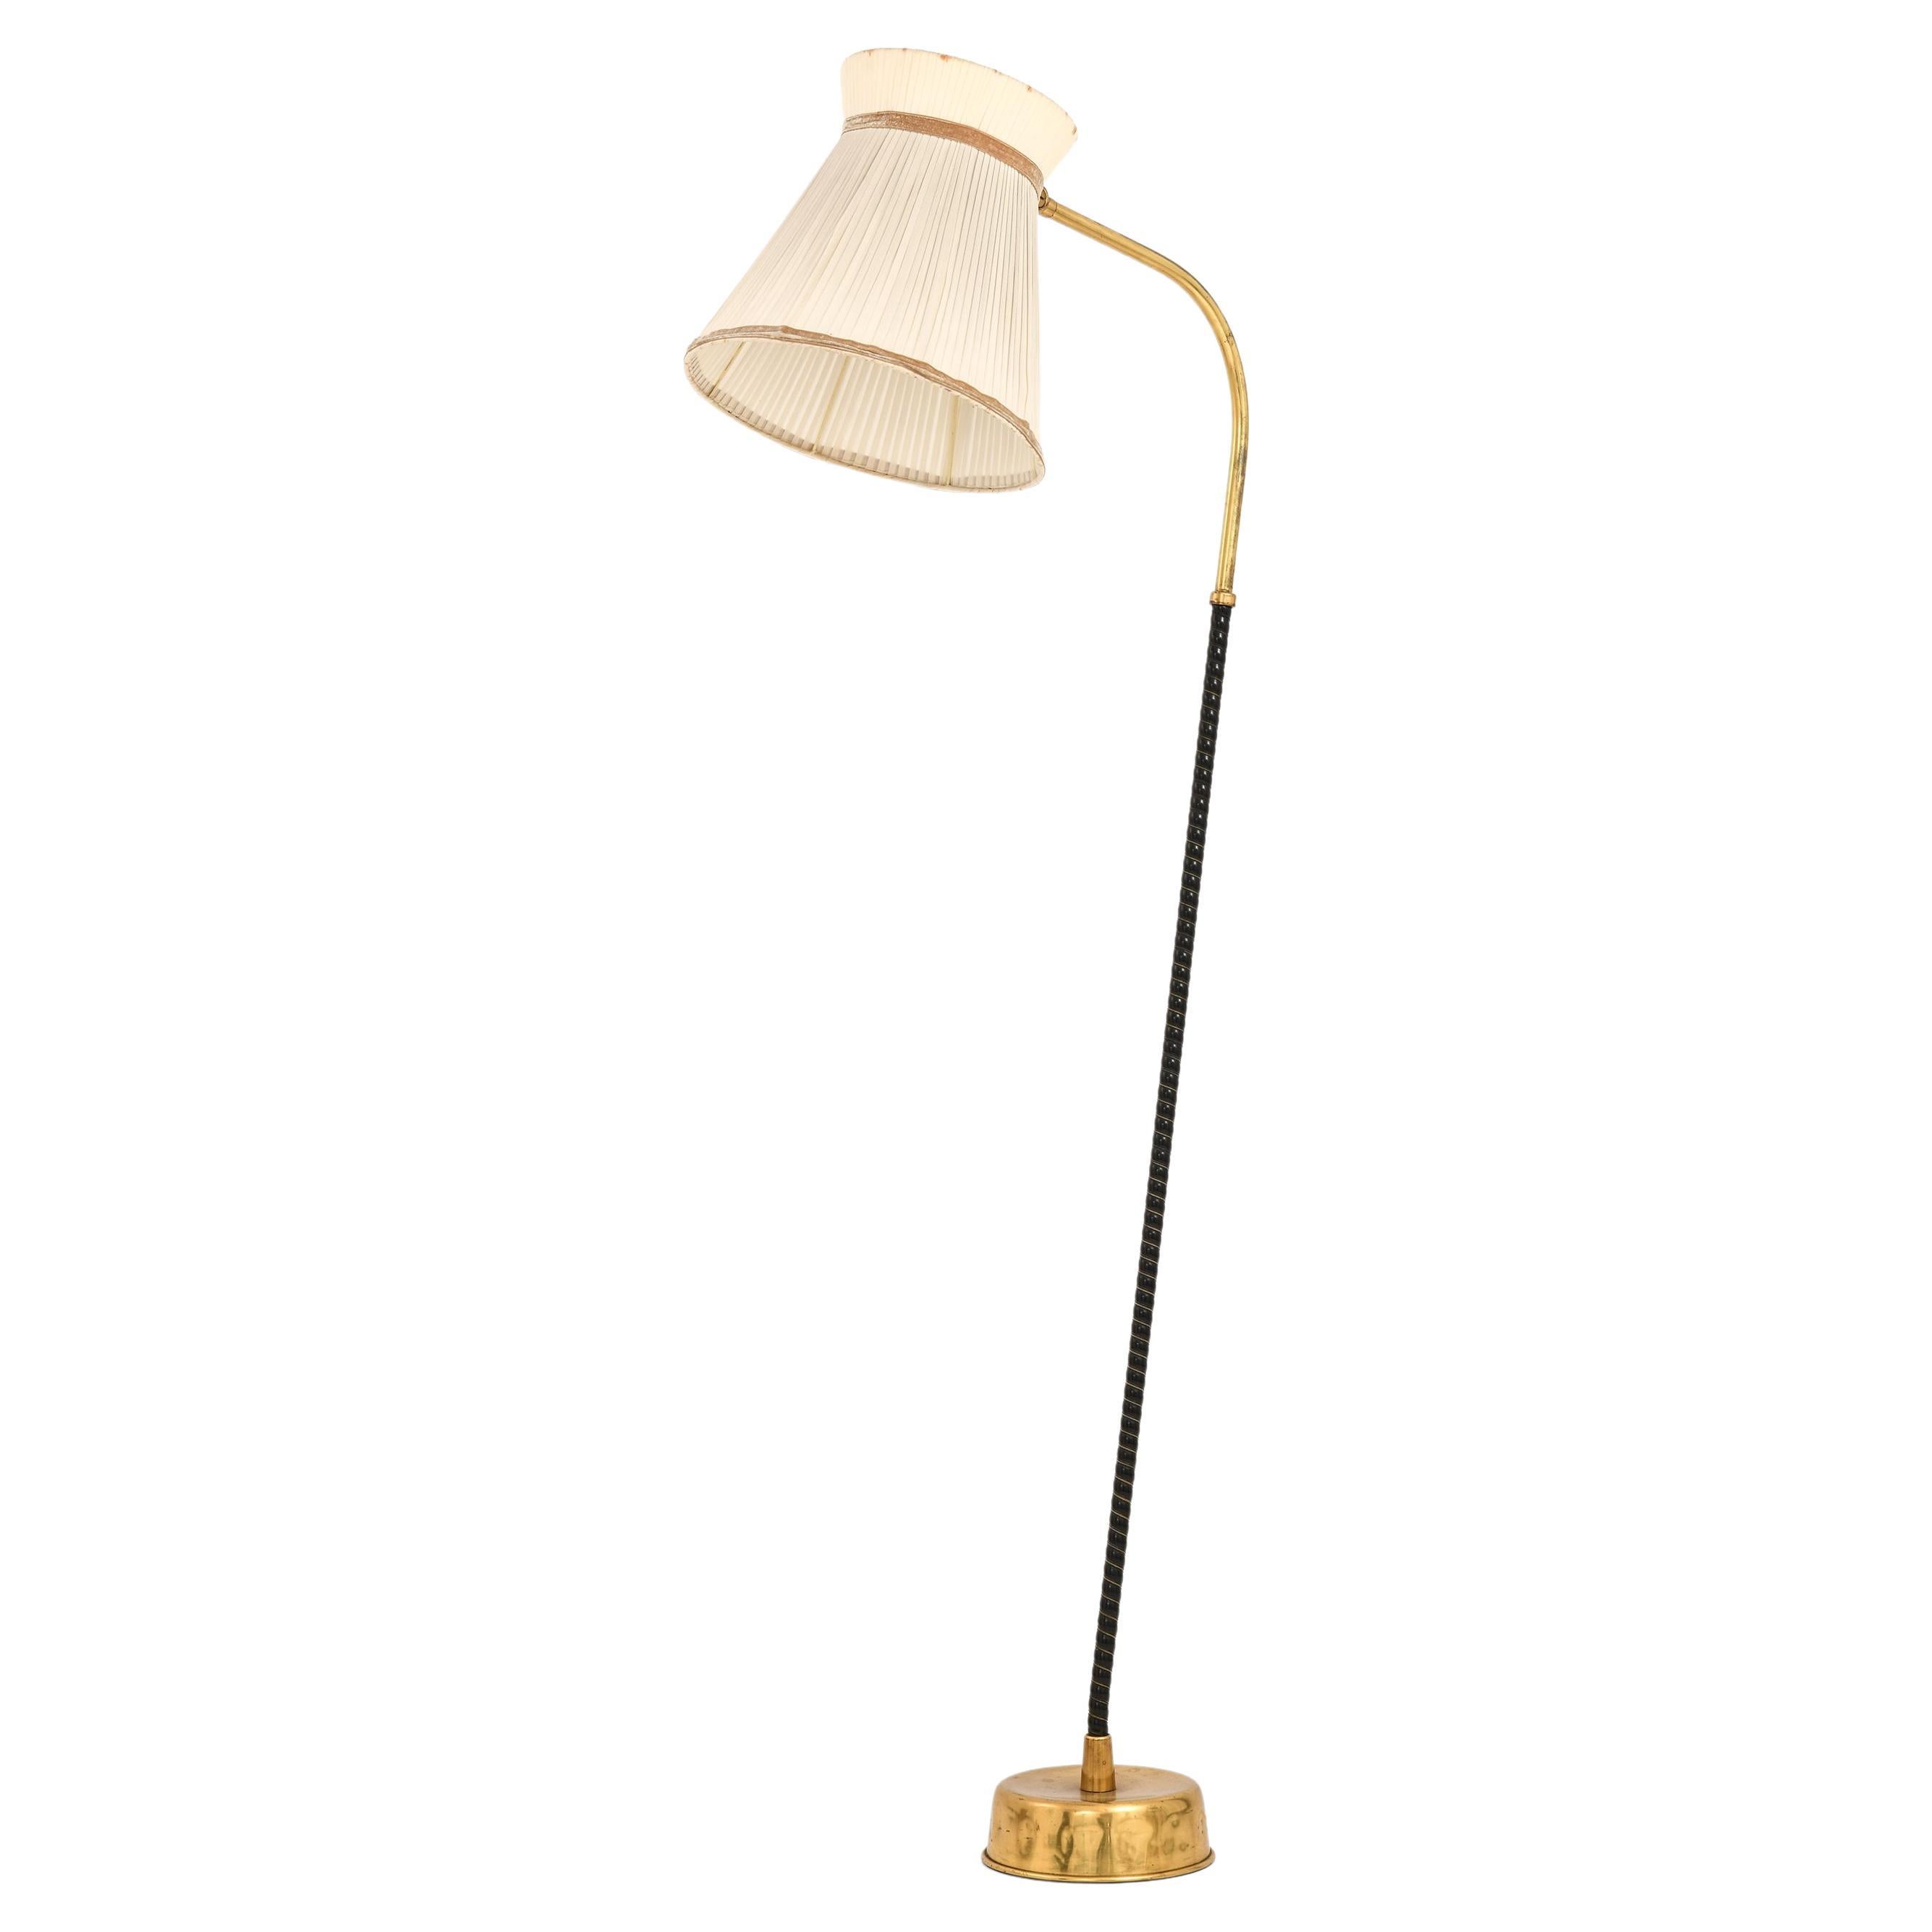 Floor Lamp in Brass, Leather and Linen Shade by Lisa Johansson-Pape, 1940’s For Sale